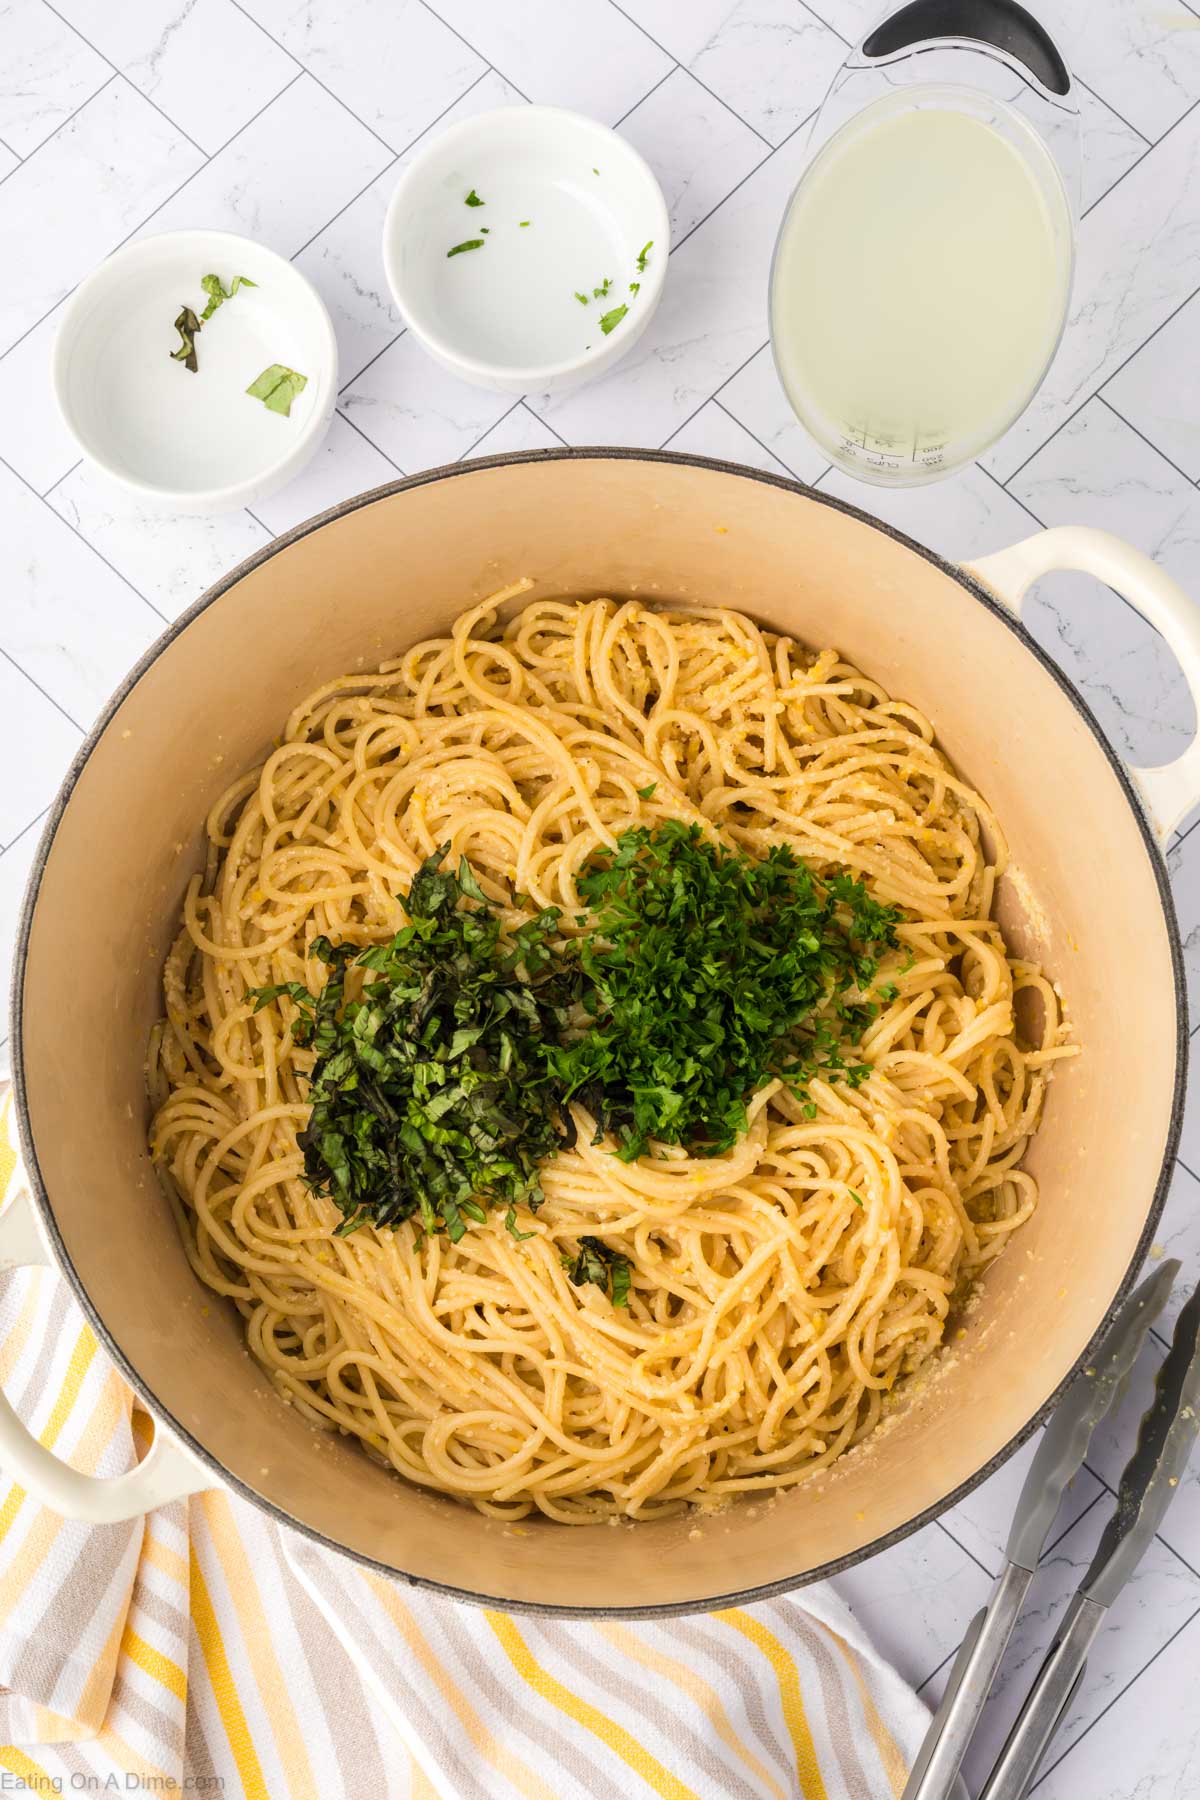 Topping the spaghetti with fresh basil and parsley